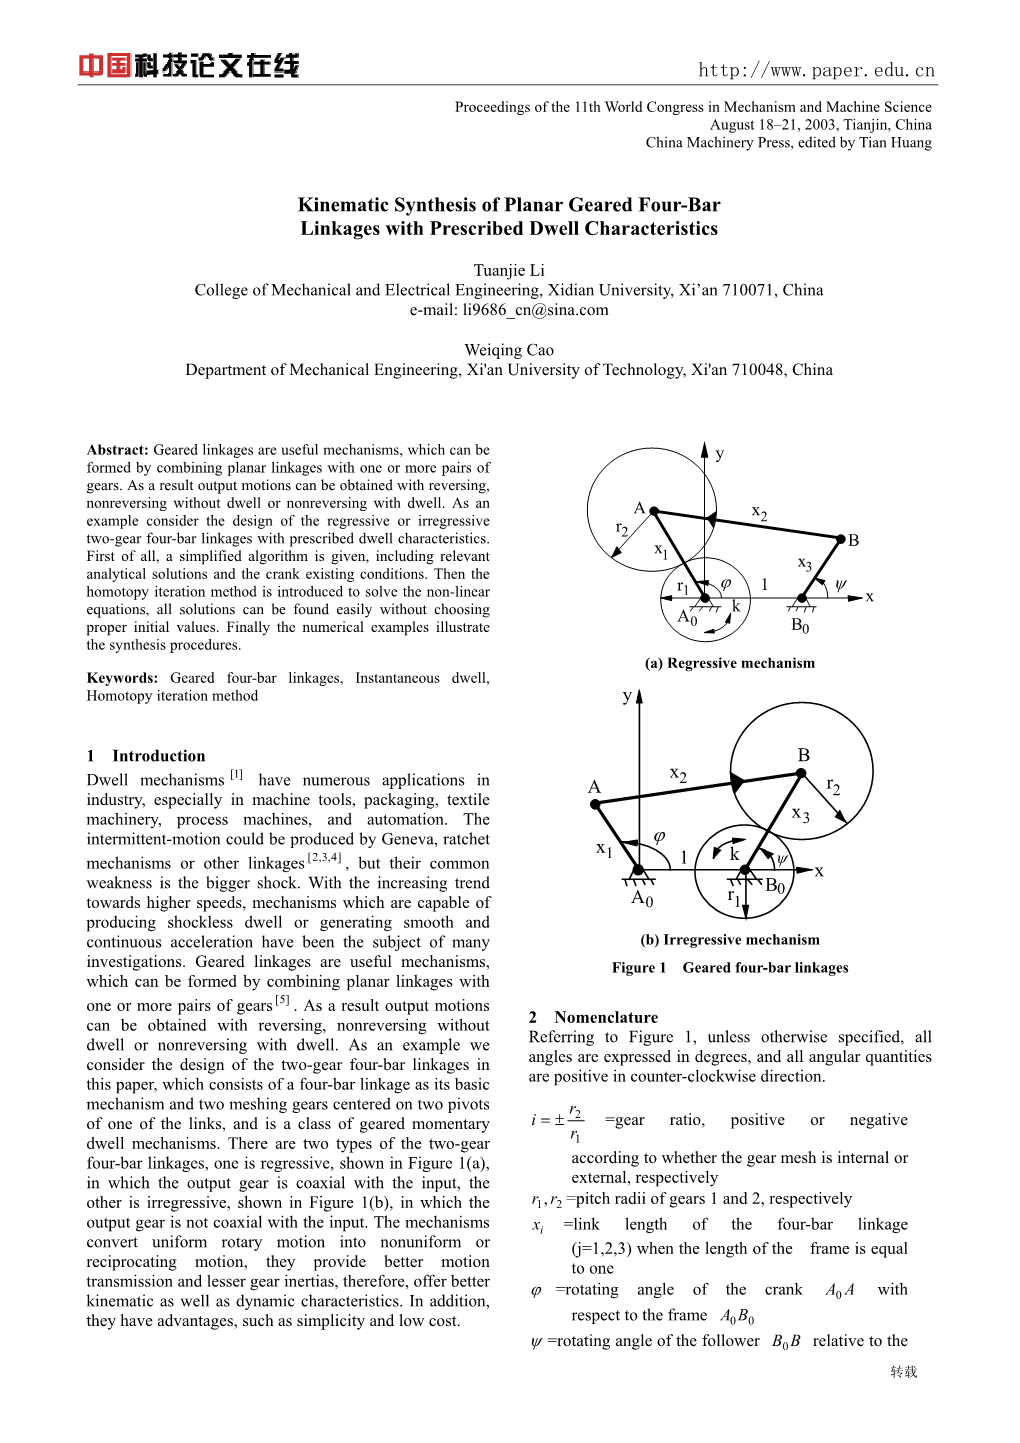 Kinematic Synthesis of Planar Geared Four-Bar Linkages with Prescribed Dwell Characteristics